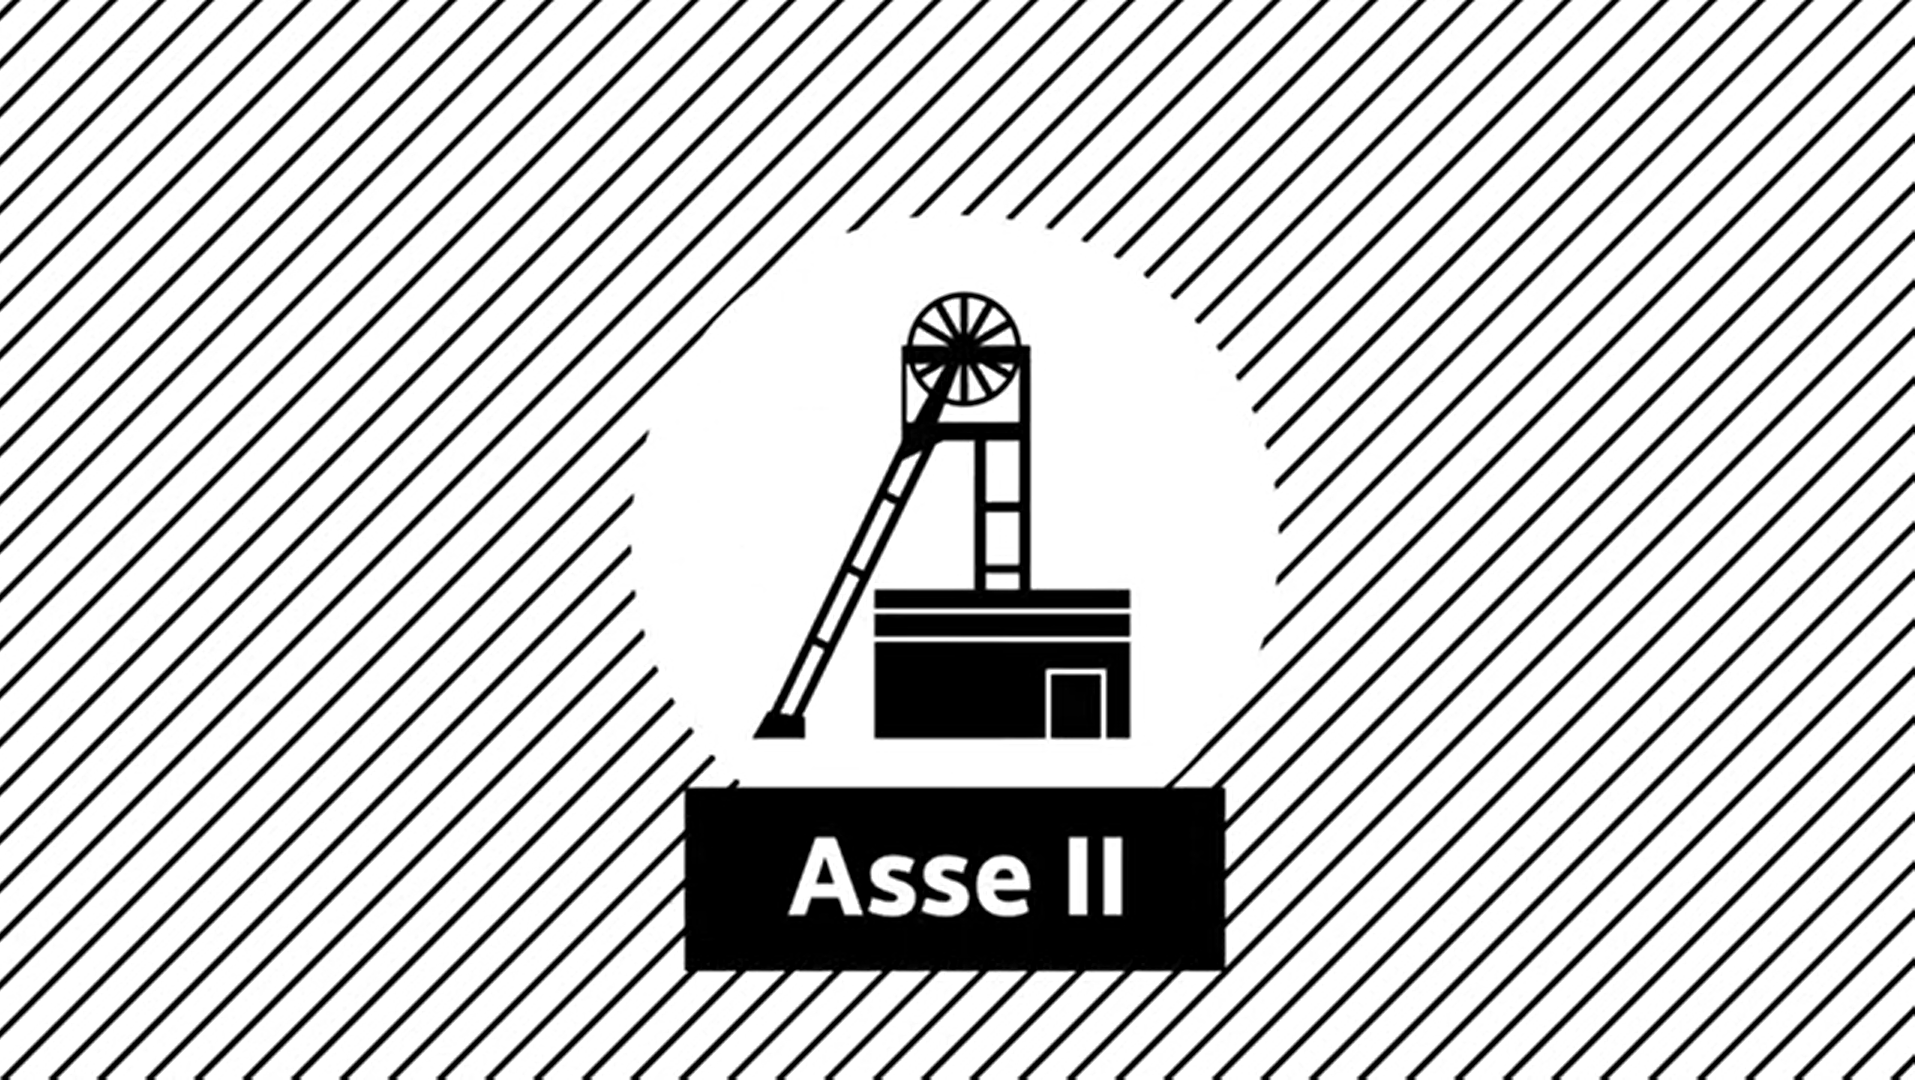 Graphic of the winding tower of the Asse mine in black and white. The graphic links to a short YouTube video about the Asse mine.